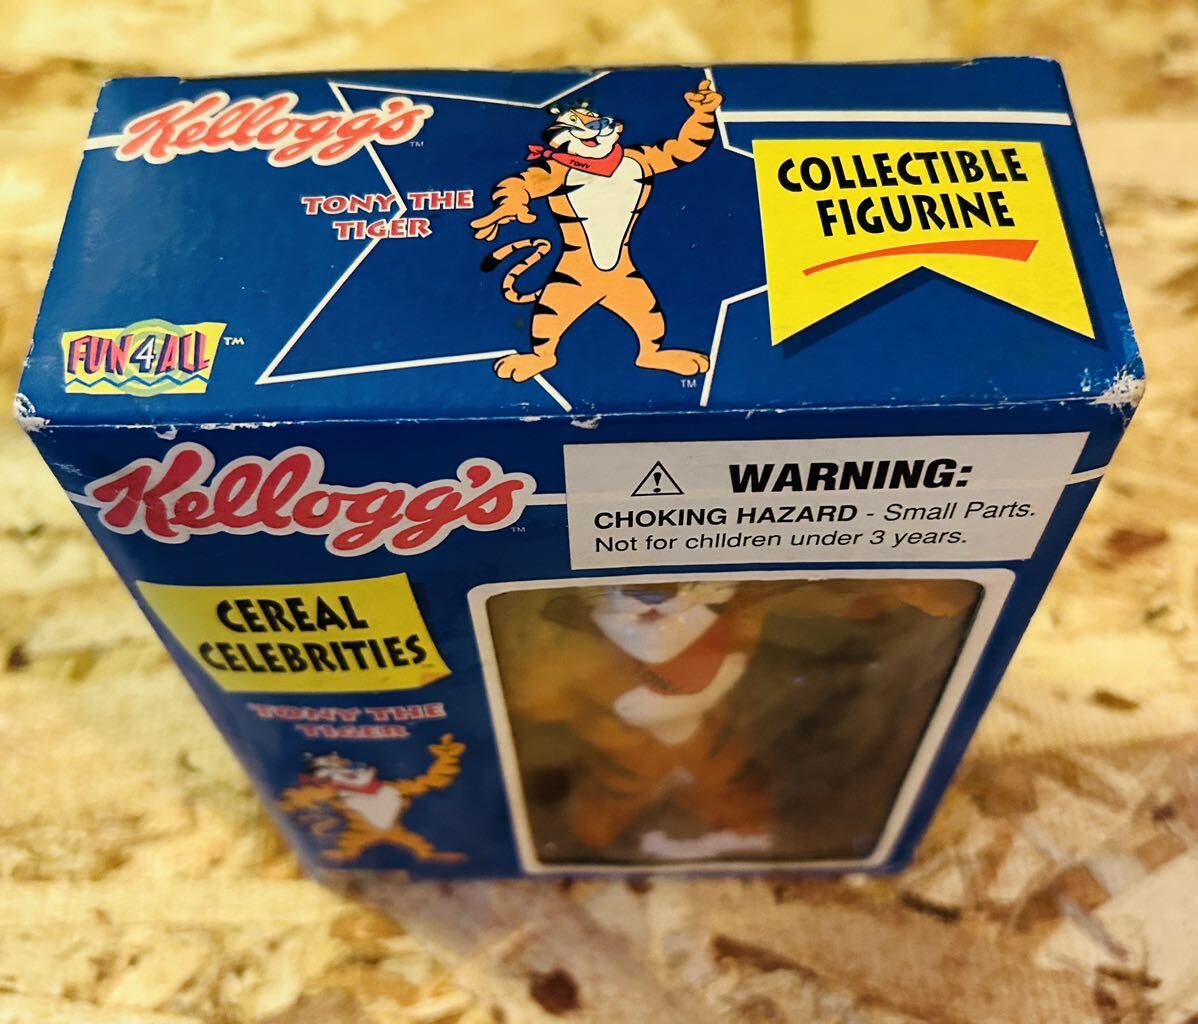 90' vintage KELLOGG'S Cereal Celebrities TONY THE TIGER Collectible Figurine◆ビンテージケロッグトニーザタイガーフィギュア◆レトロ_画像5